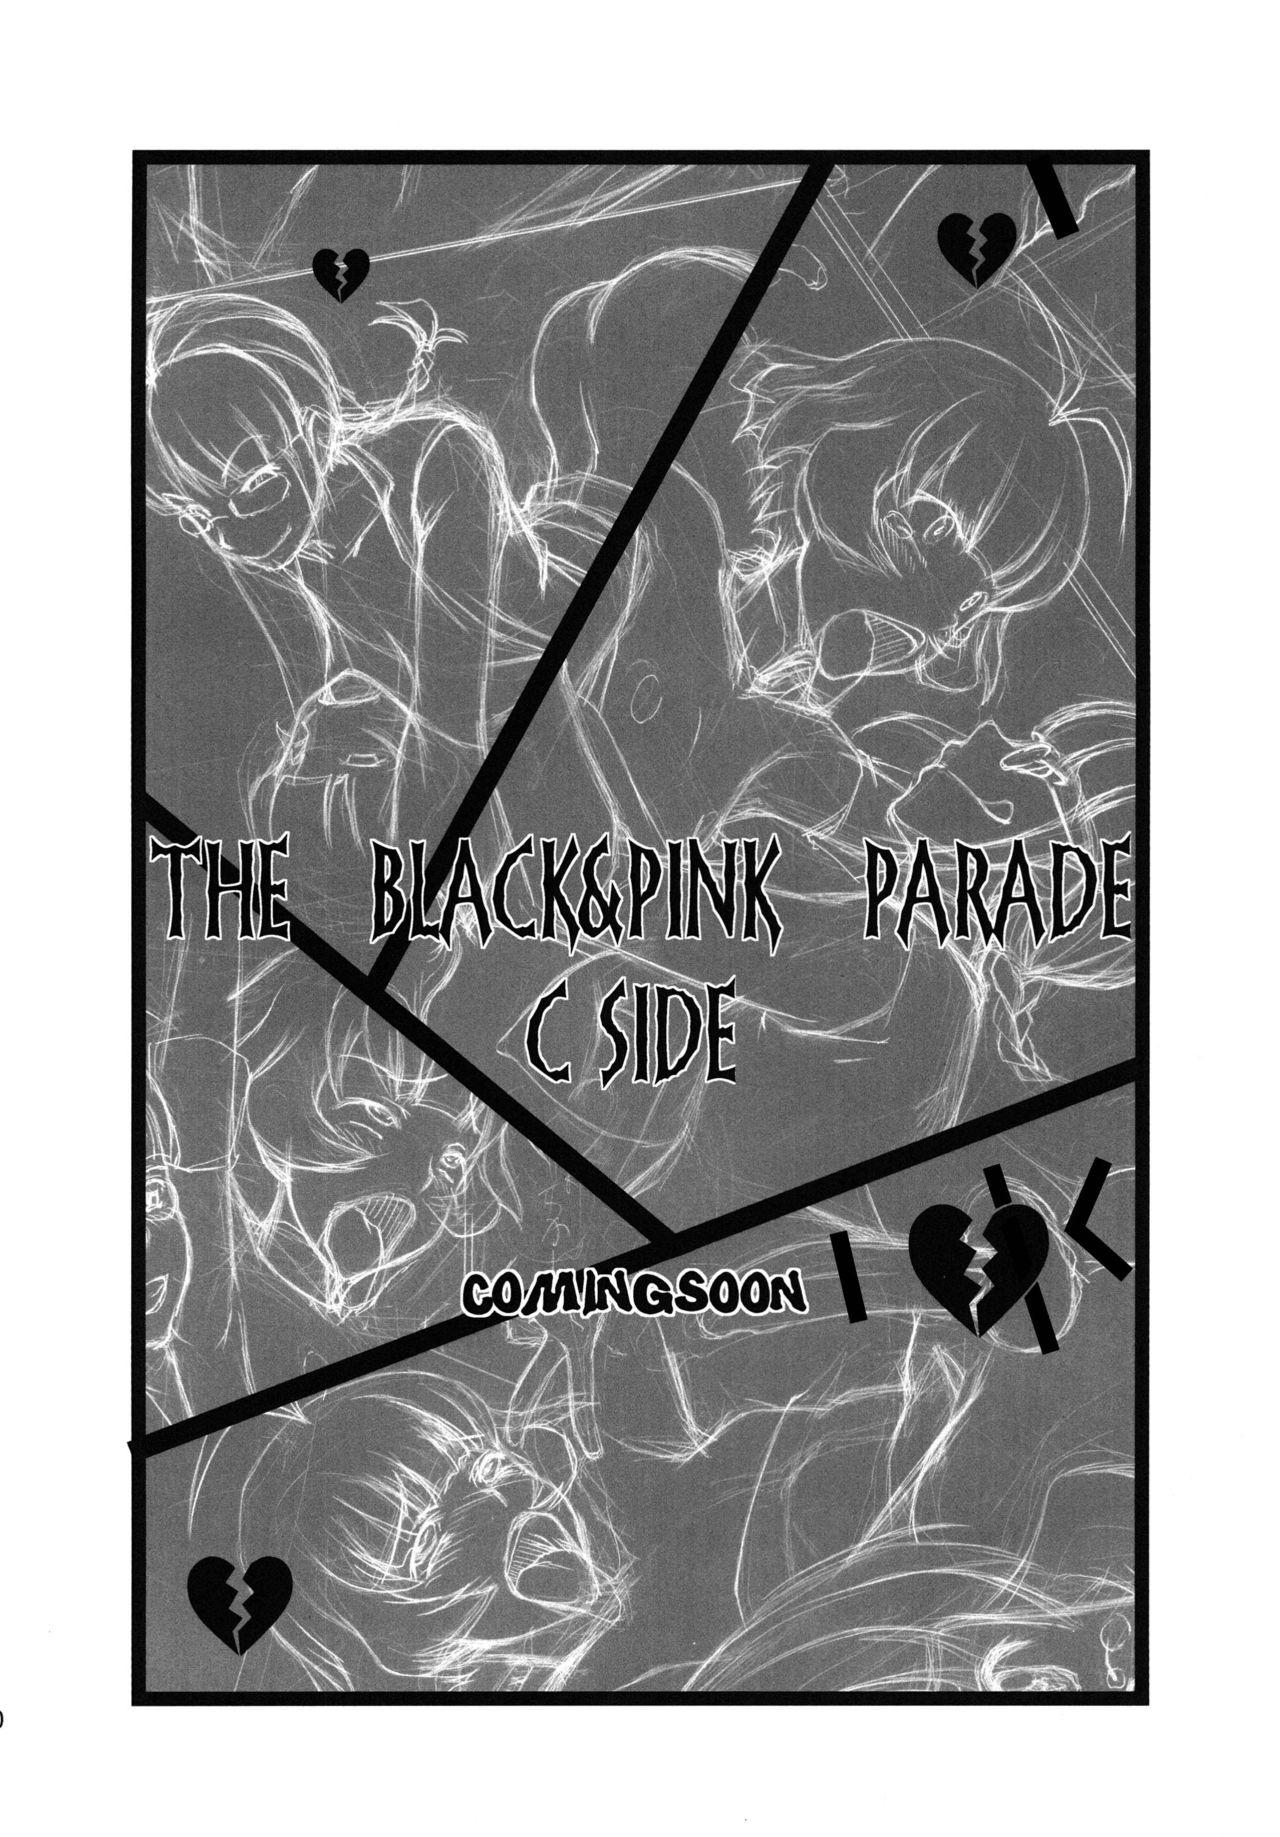 THE BLACK&PINK PARADE B-SIDE 19